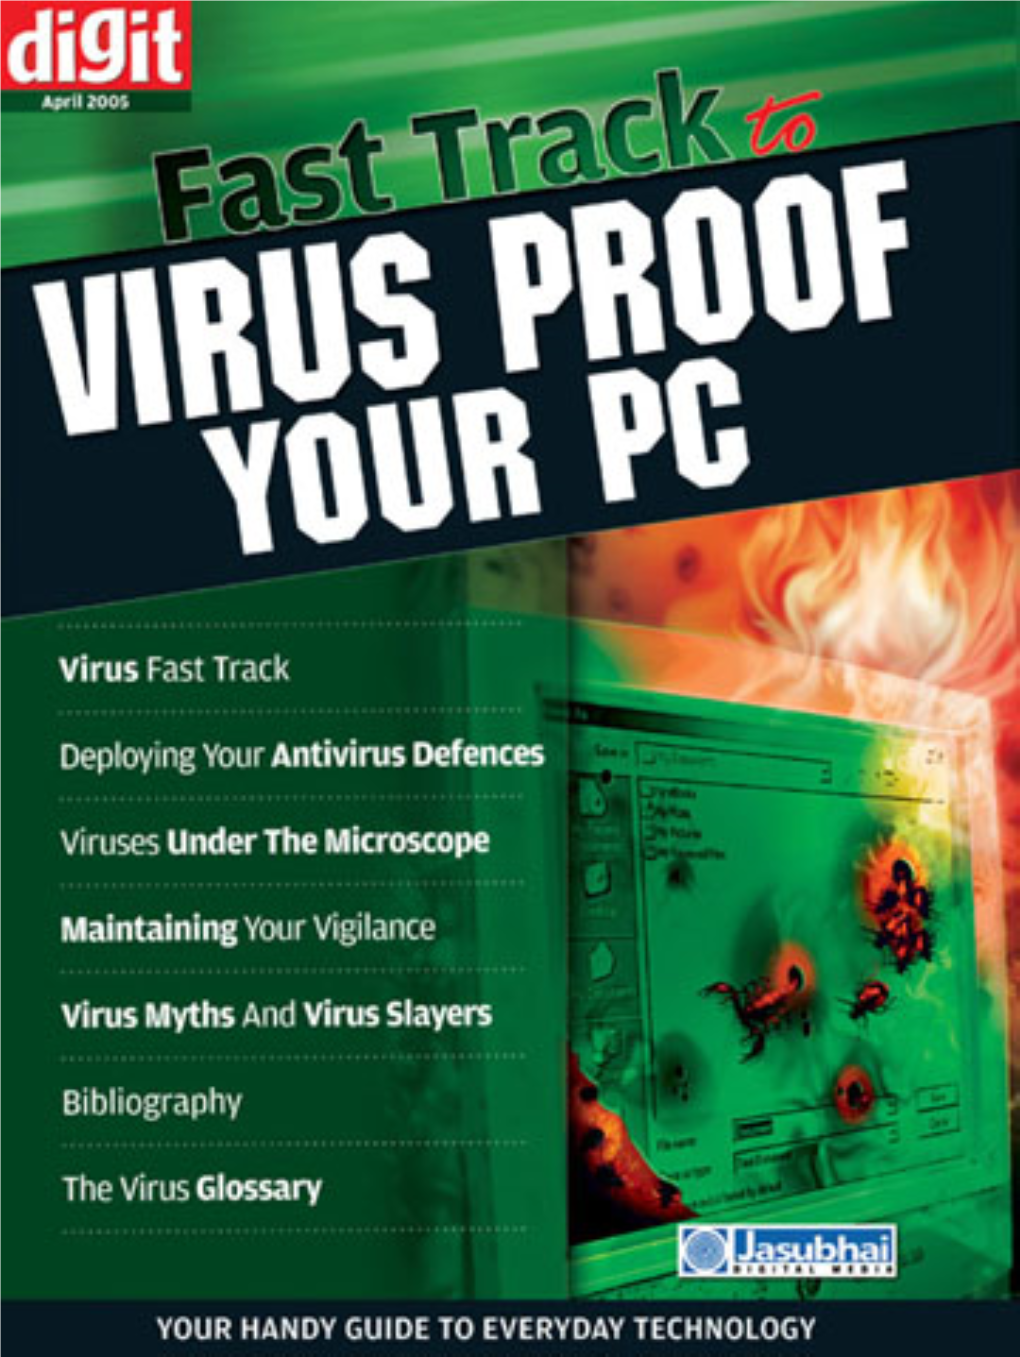 Virus Proof Your PC